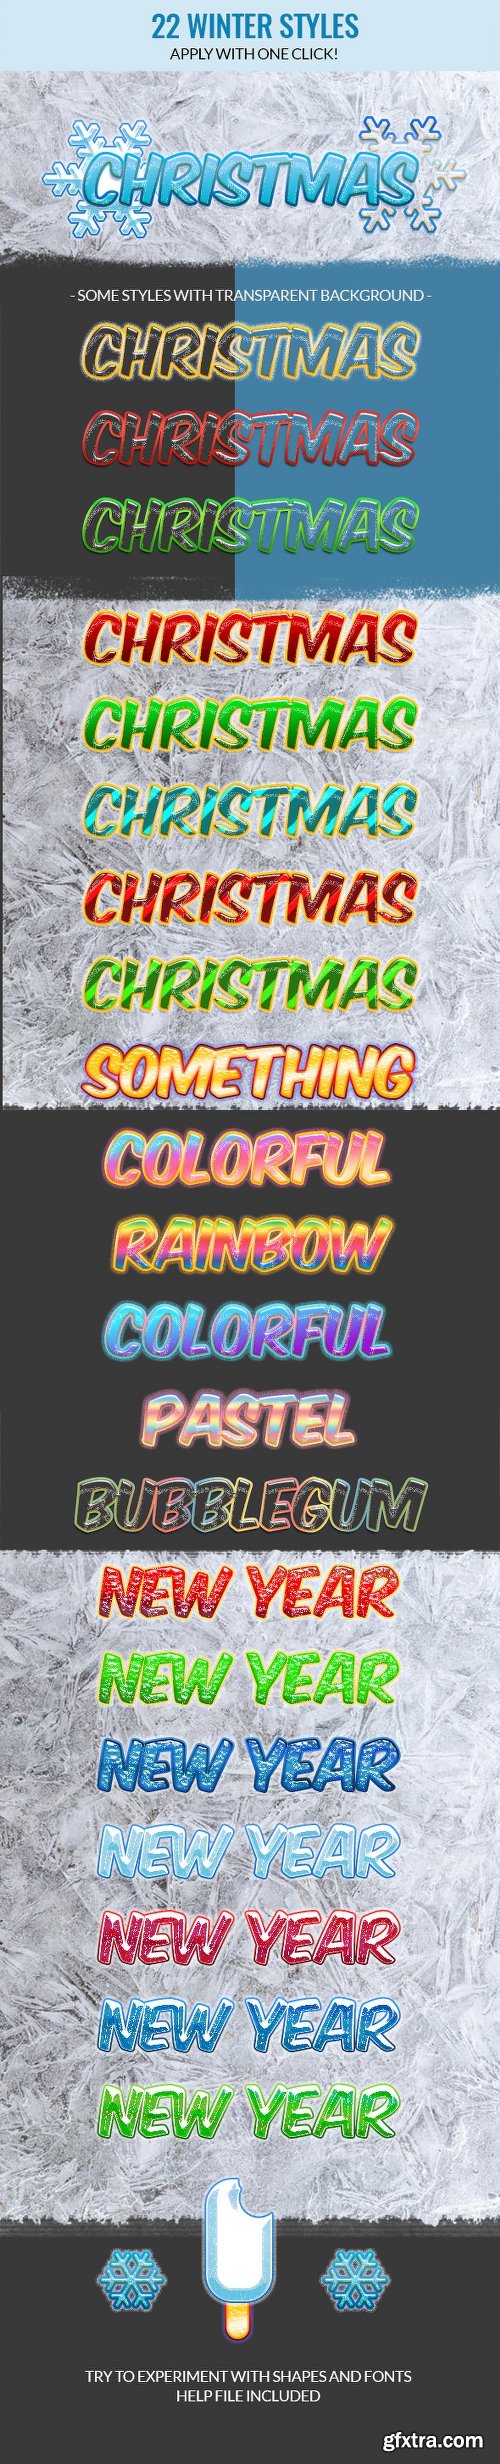 Graphicriver Holiday Christmas Photoshop Text Styles 21078144